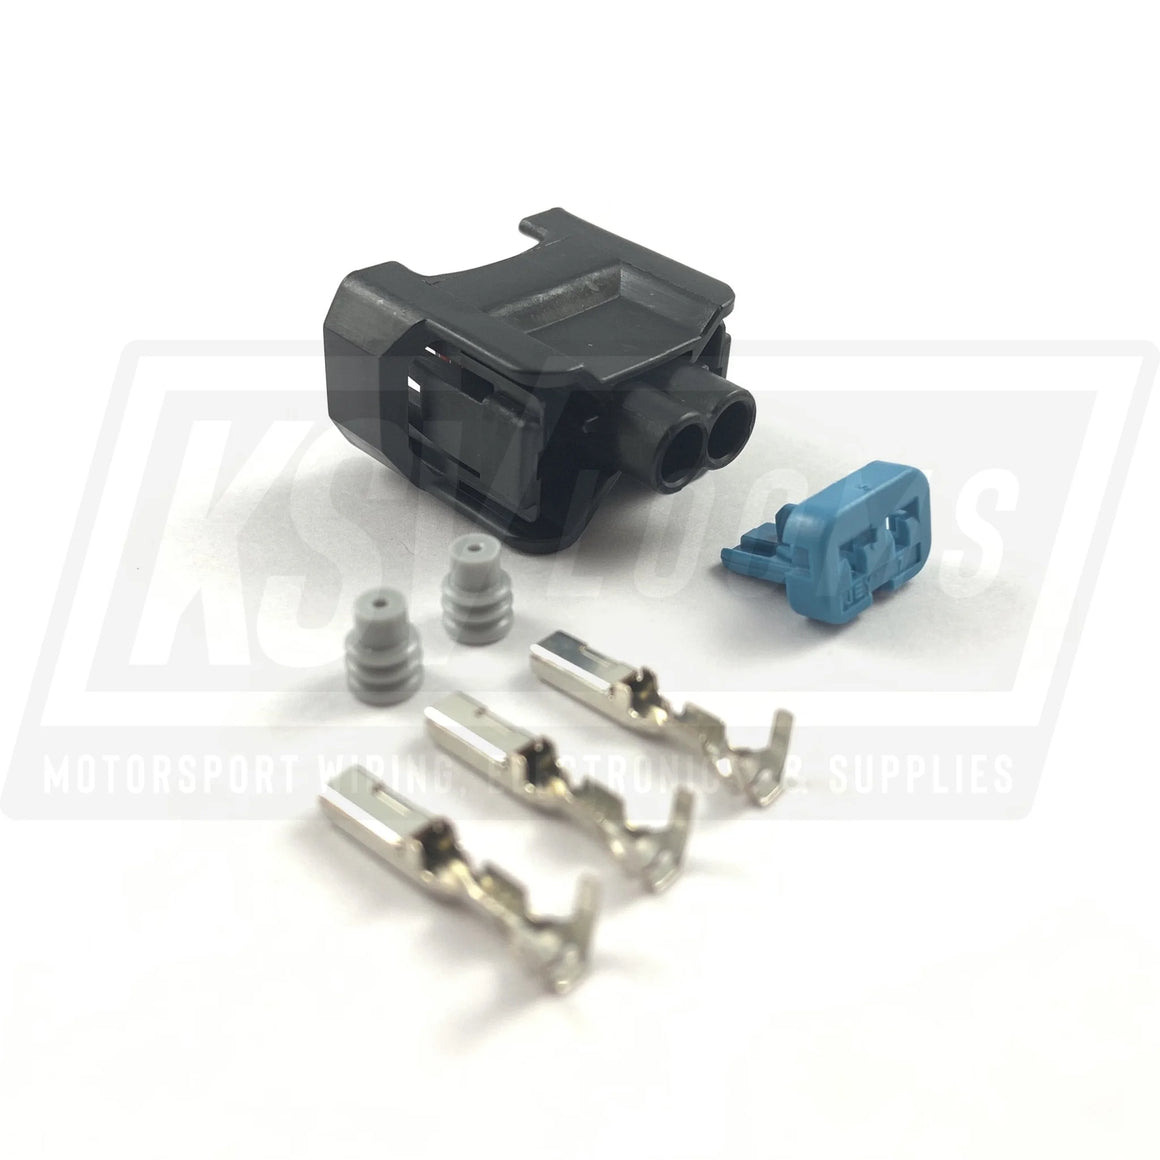 2-Way Connector Kit For Honda S2000 F20 F22 Fuel Injector (22-20 Awg)